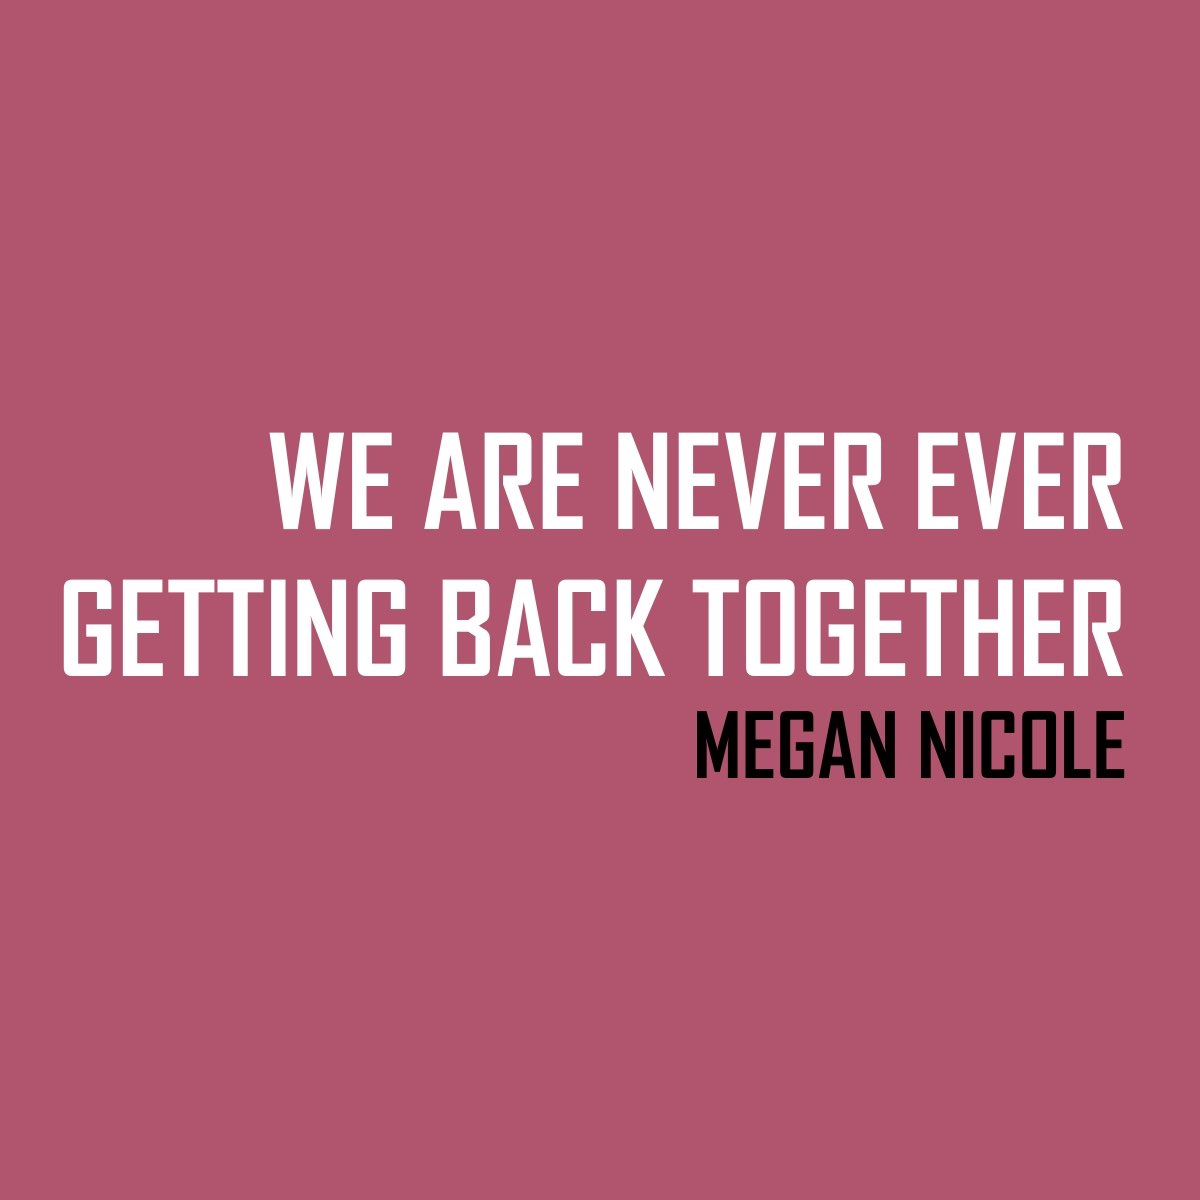 Are never show. We are never ever getting back together. Песня we are never ever ever getting back together. Ever never. We are never ever getting back together gif.